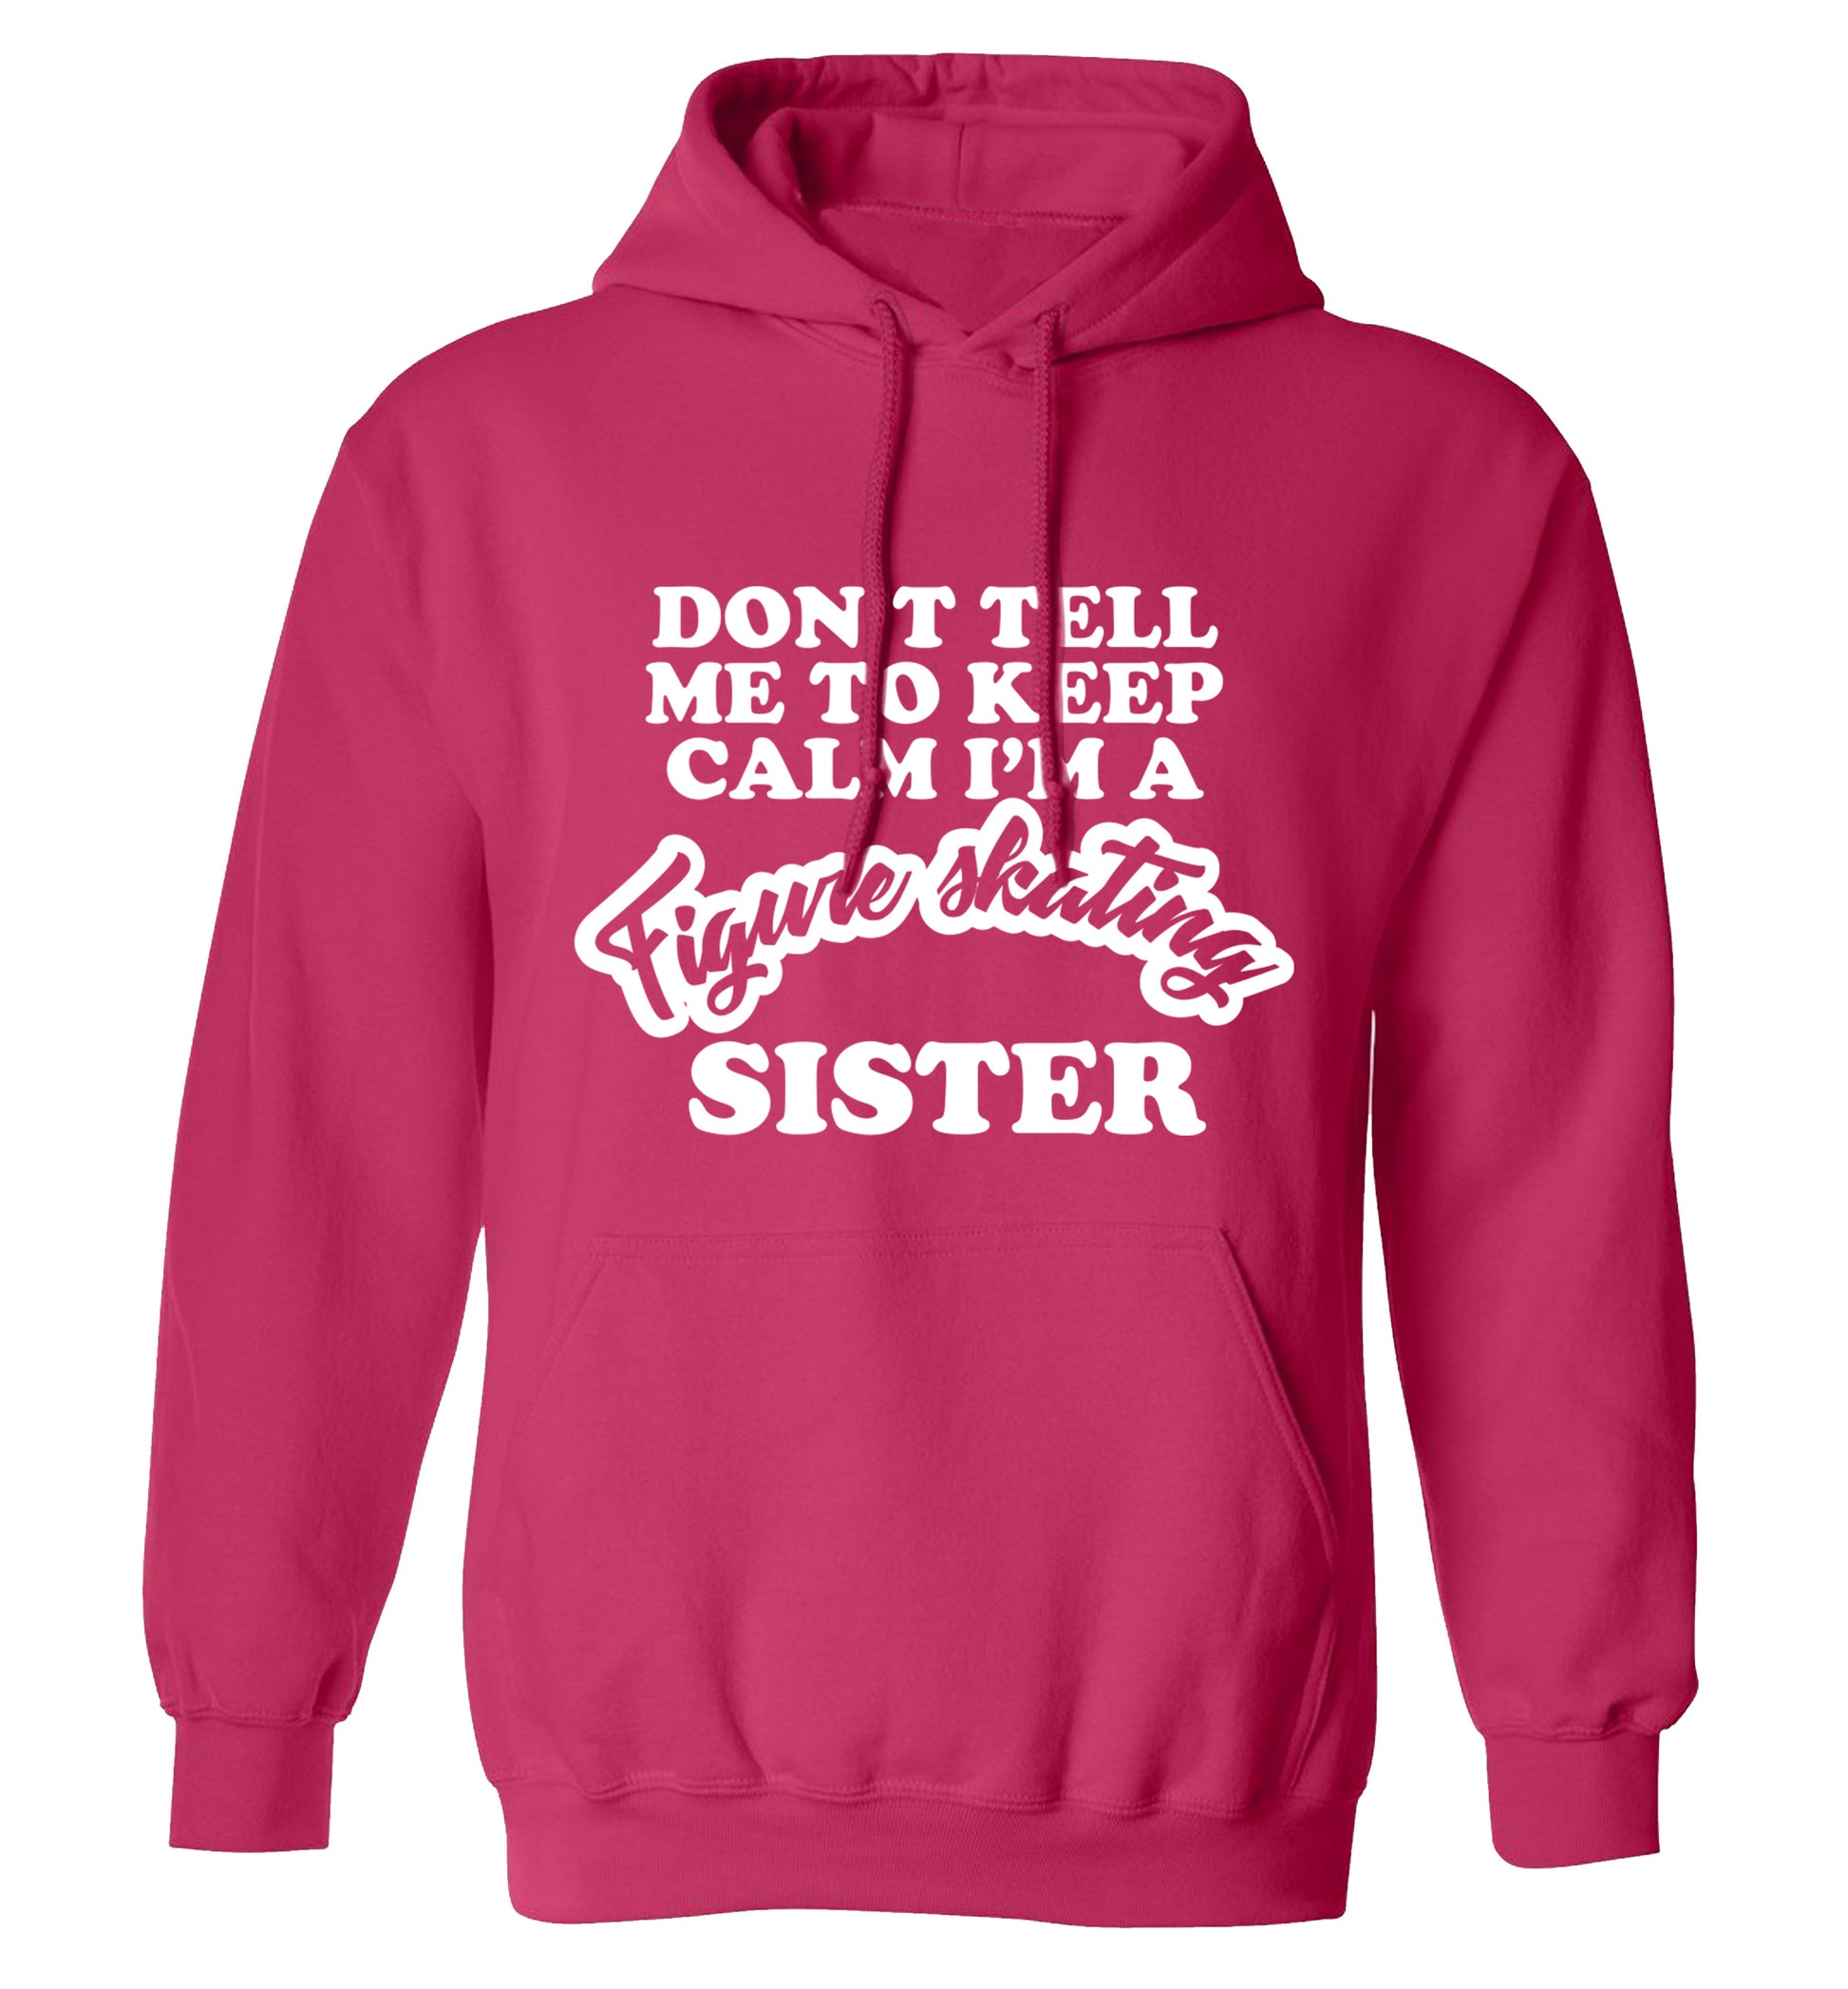 Don't tell me to keep calm I'm a figure skating sister adults unisexpink hoodie 2XL